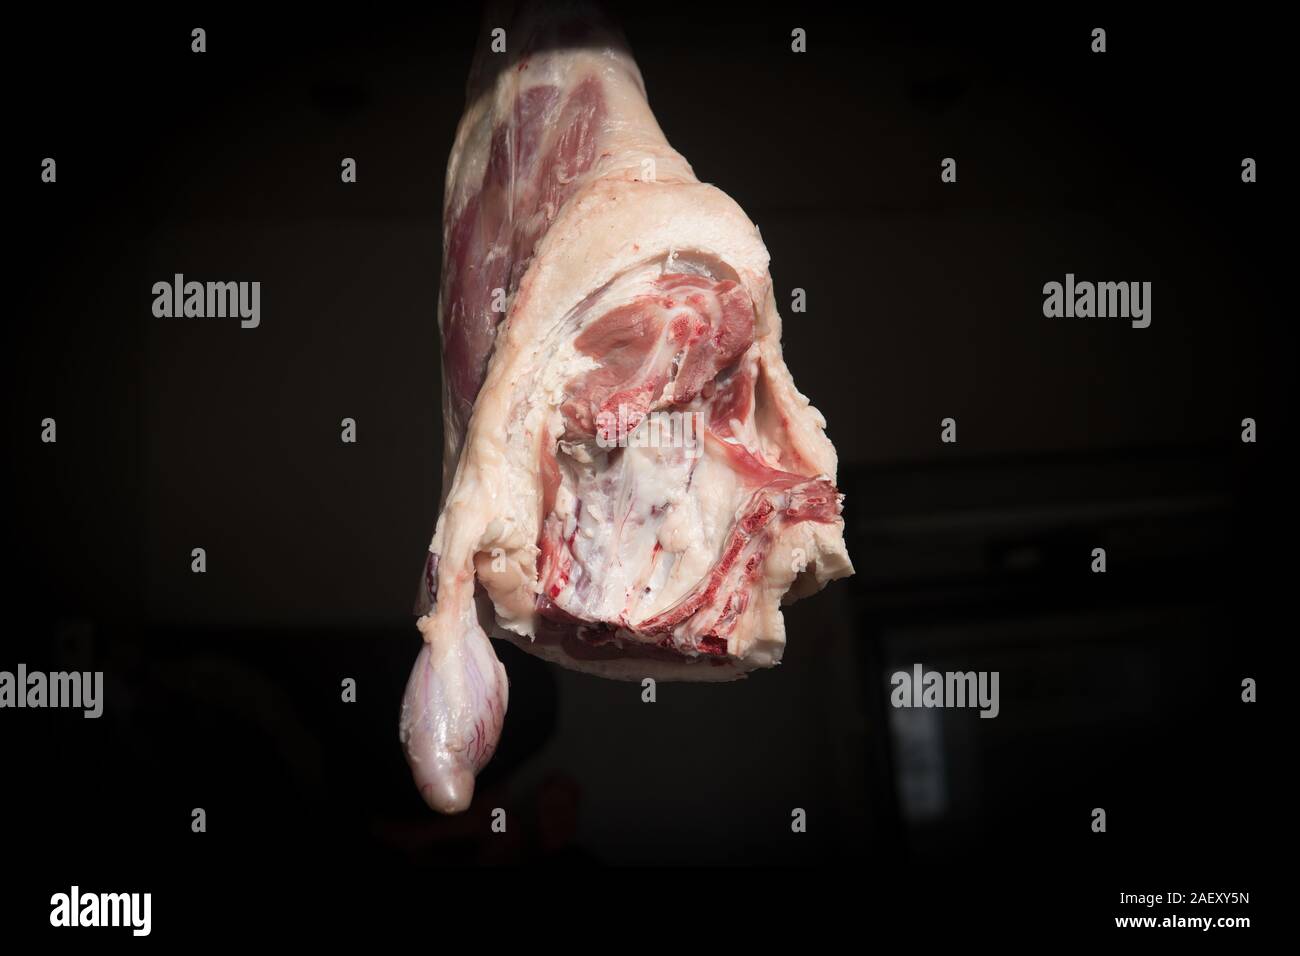 Goat hip meat hanging at an asian market or bazaar for sale. Stock Photo